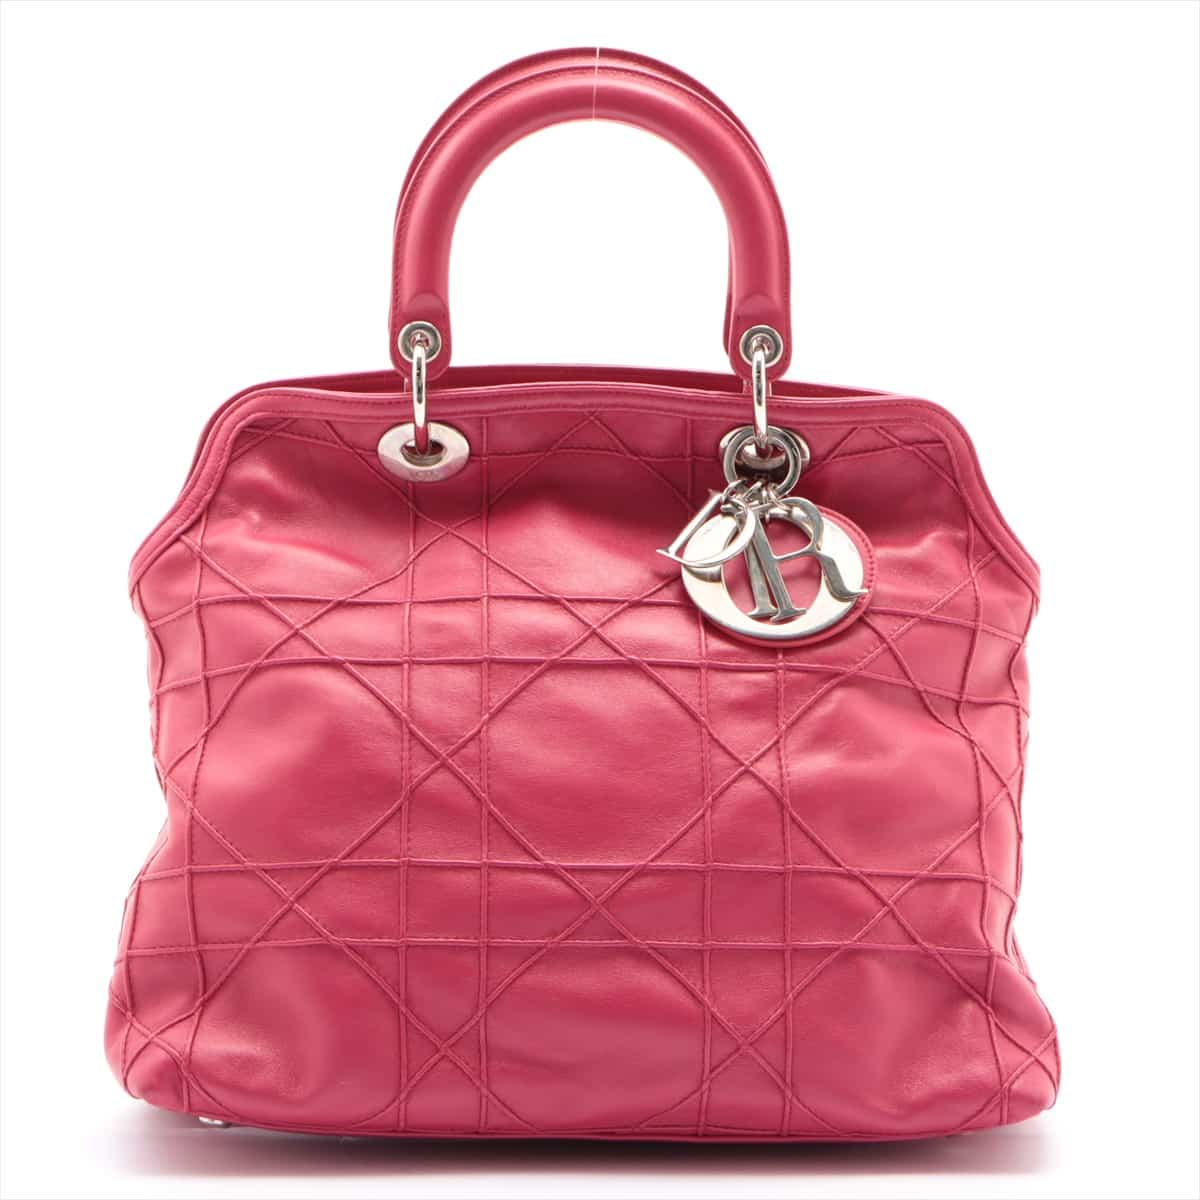 Christian Dior Grandville Leather 2way handbag Pink Leather peeling from the zipper pull